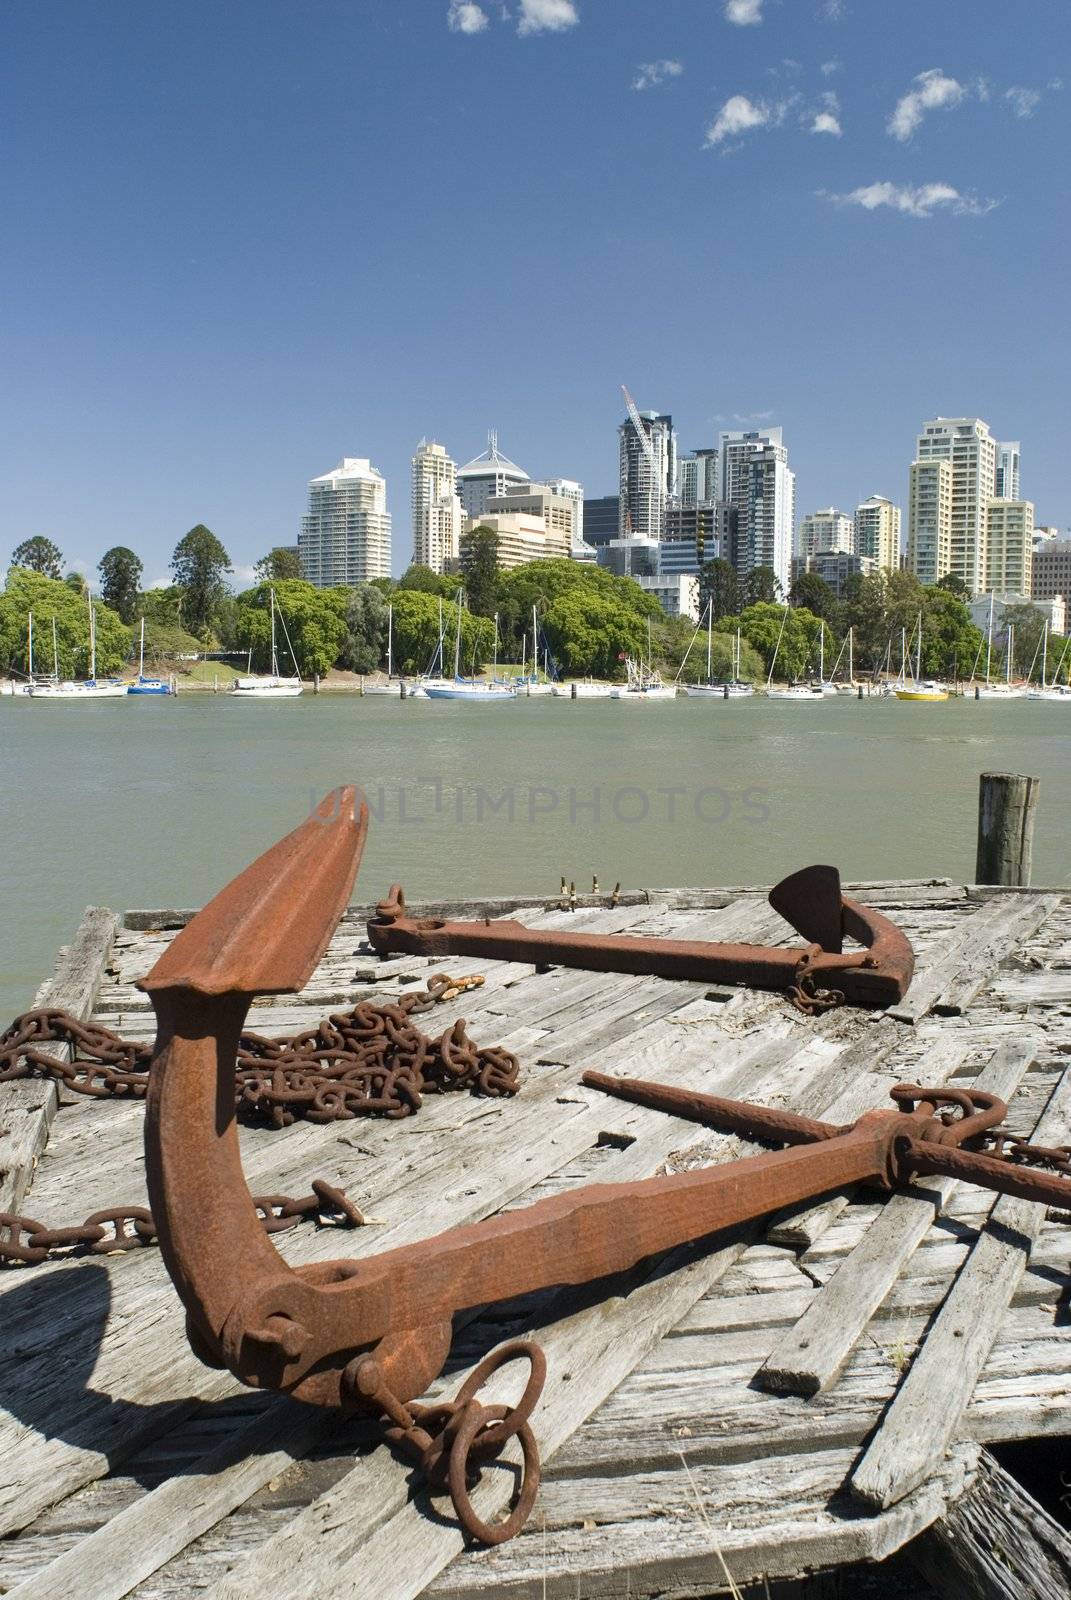 A view across the brisbane river from the historic kangaroo point area towards brisbane CBD